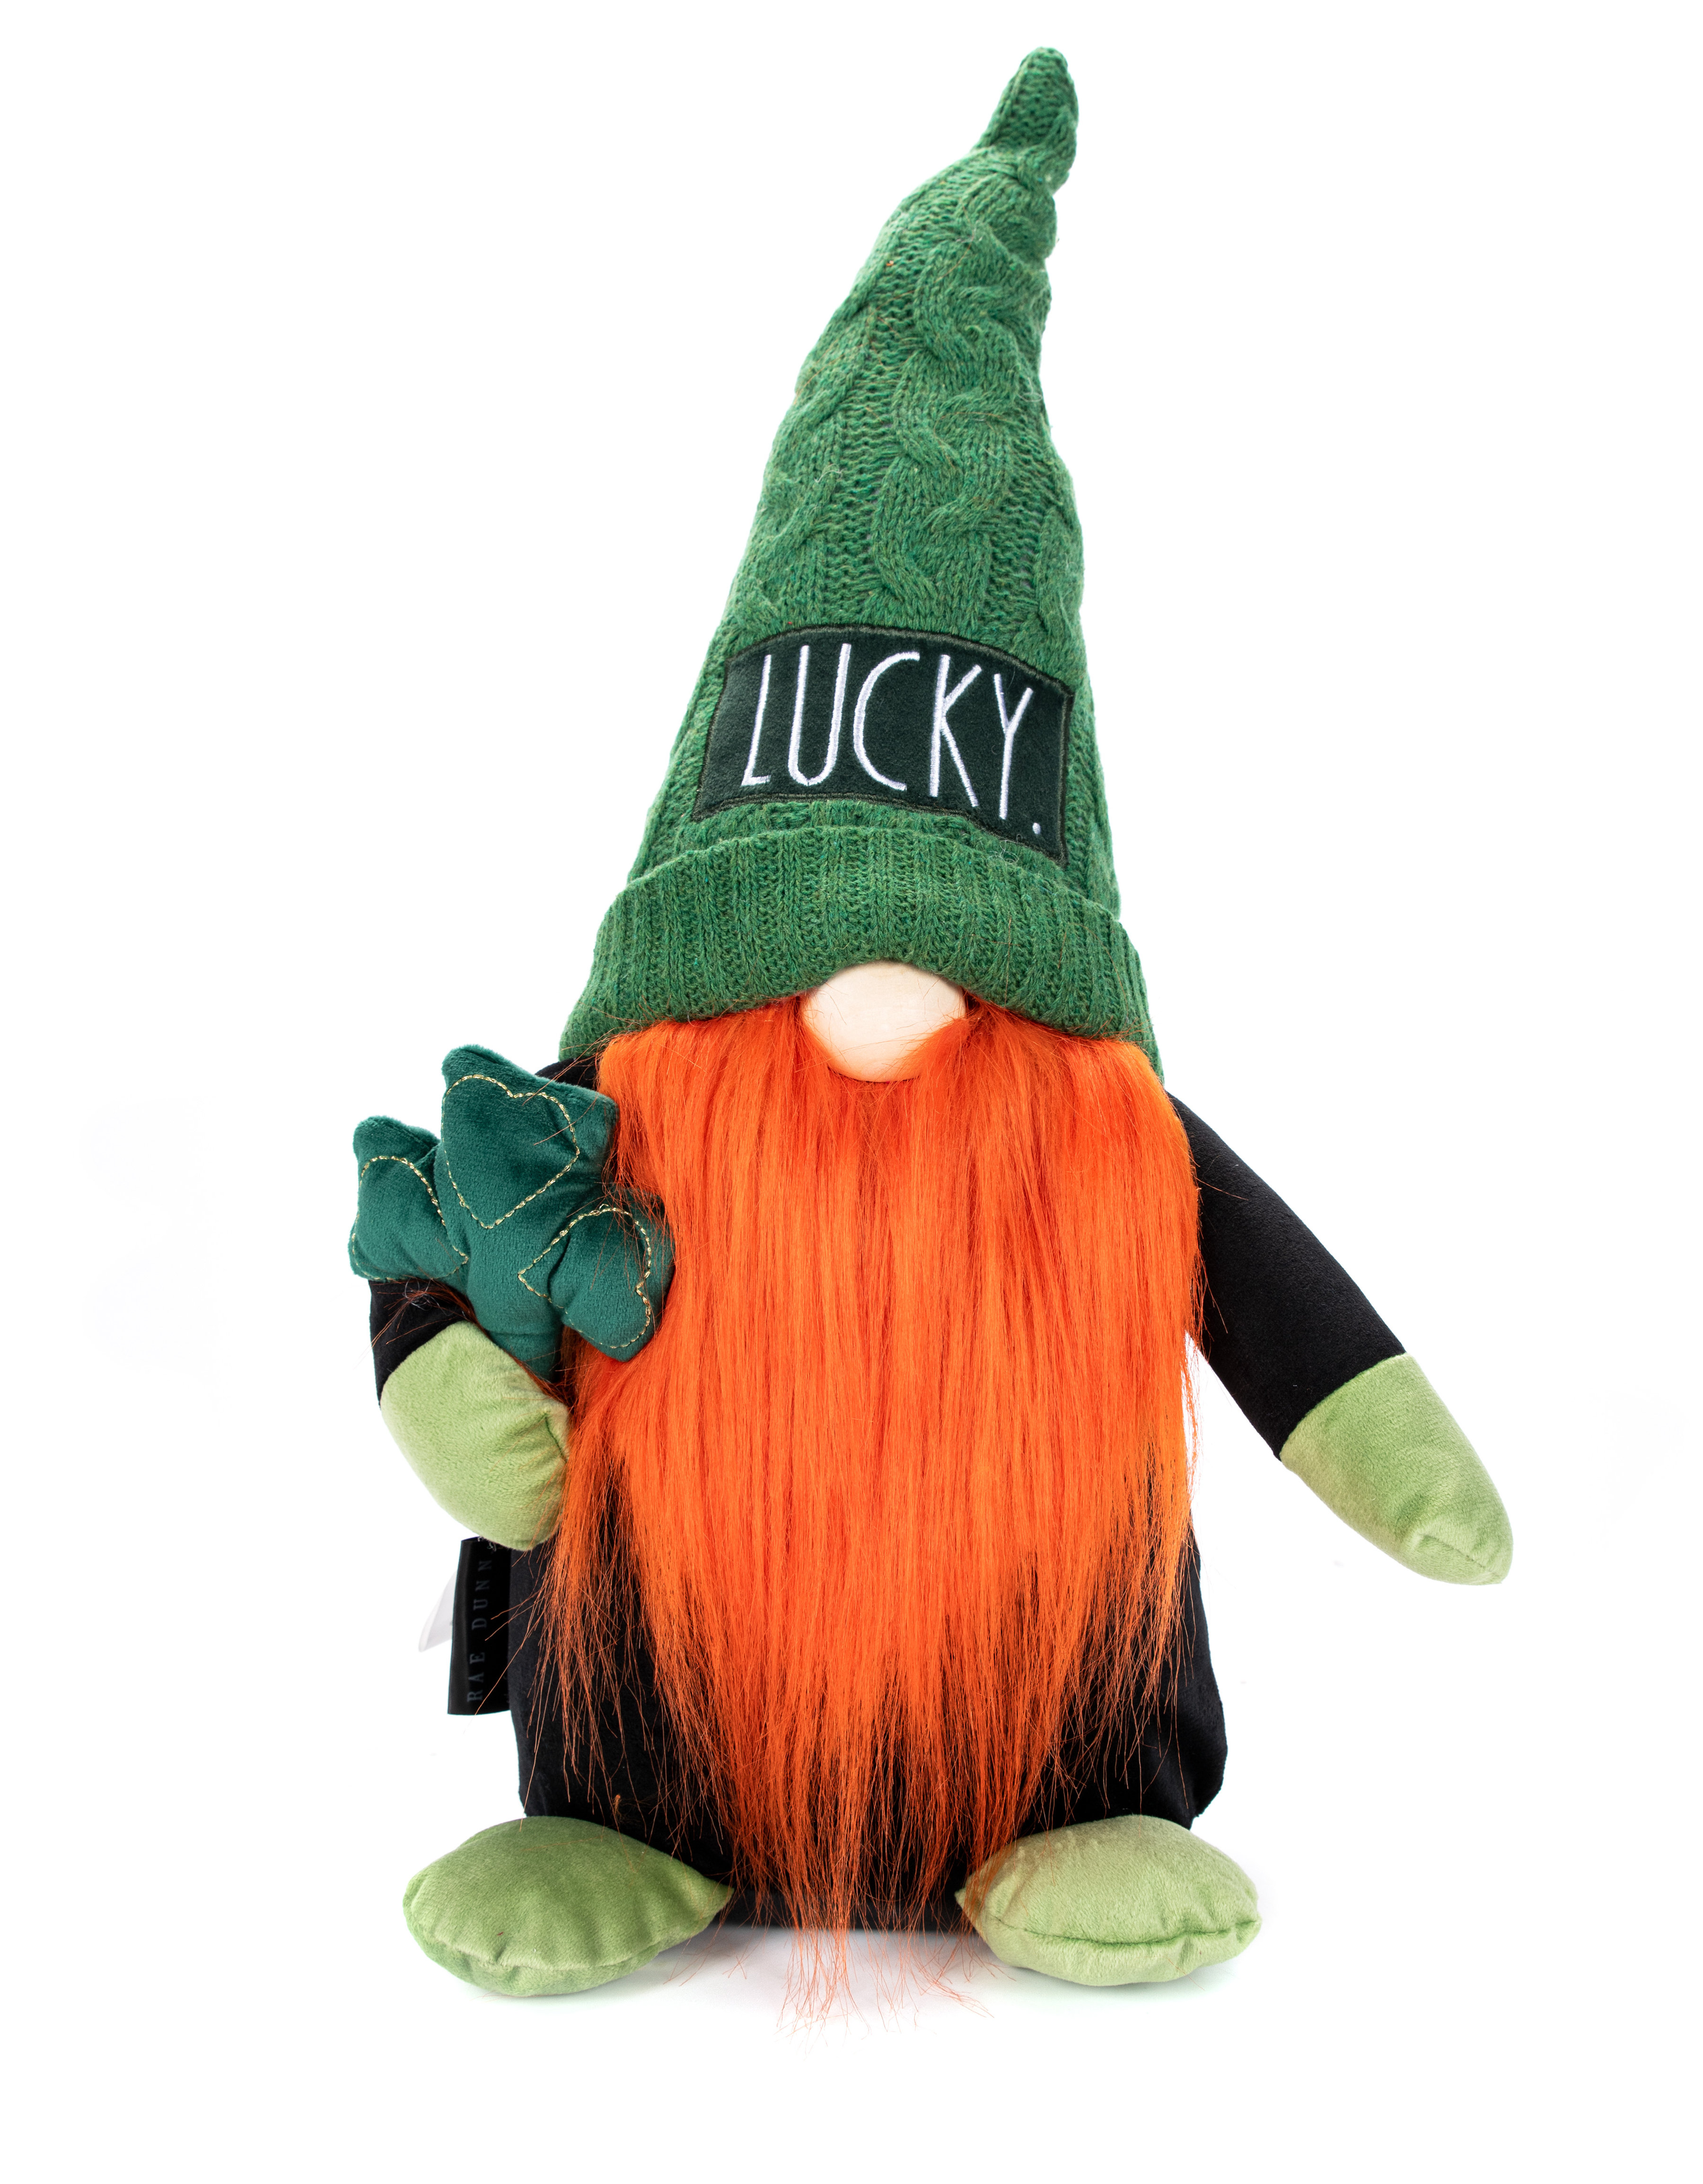 Kitchen Gnomes by Rae Dunn: The Perfect Gift, Design Styles